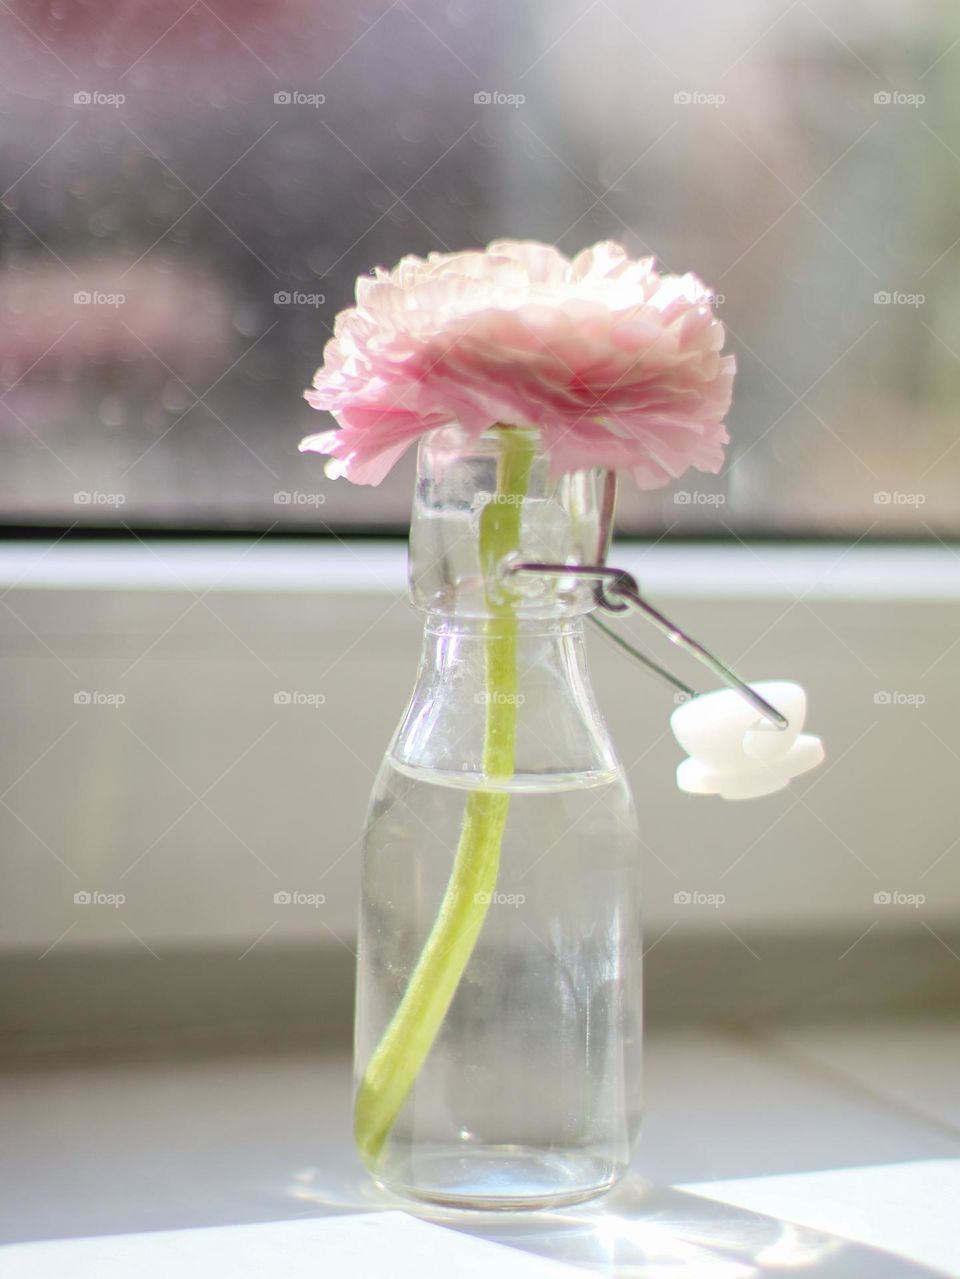 One pink peony in a small bottle vase stands on the windowsill, close-up side view.